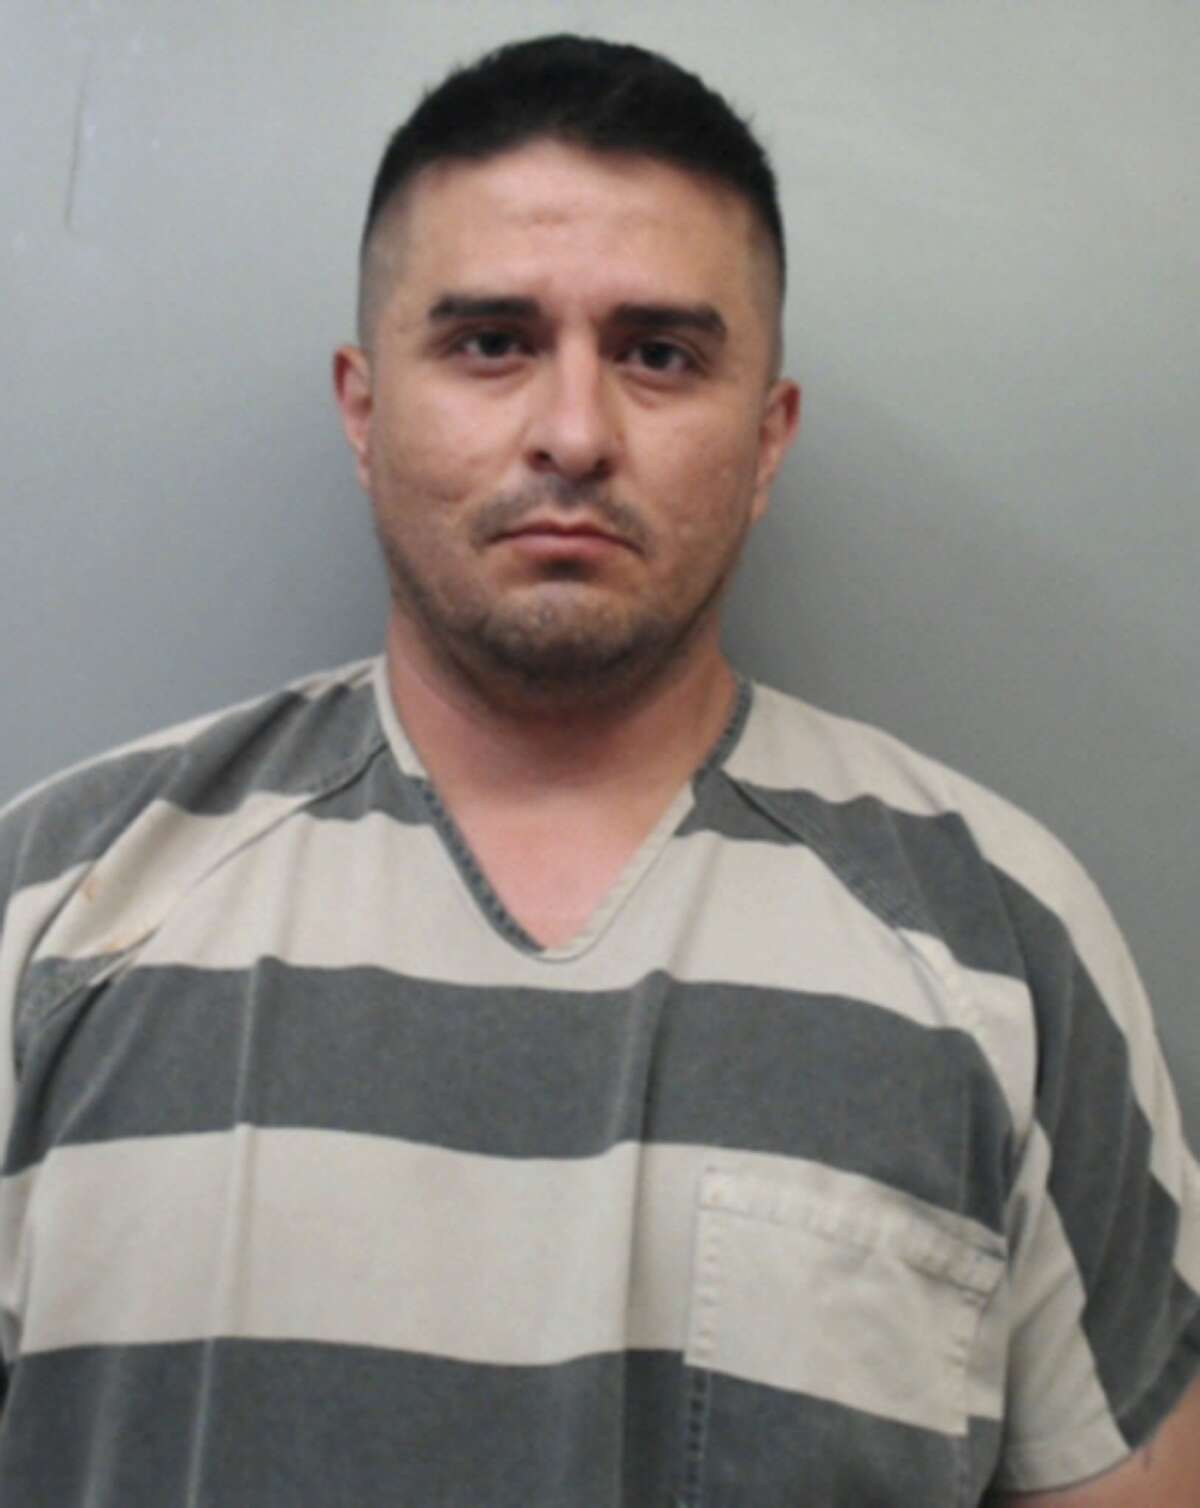 1. He was a seasoned Border Patrol agent Police said Ortiz was a 10-year veteran of the agency and worked as an intelligence supervisor. Court documents reveal that he was part of the Highway Interdiction Team, a group tasked with intercepting vehicles suspected of trafficking drugs and humans.